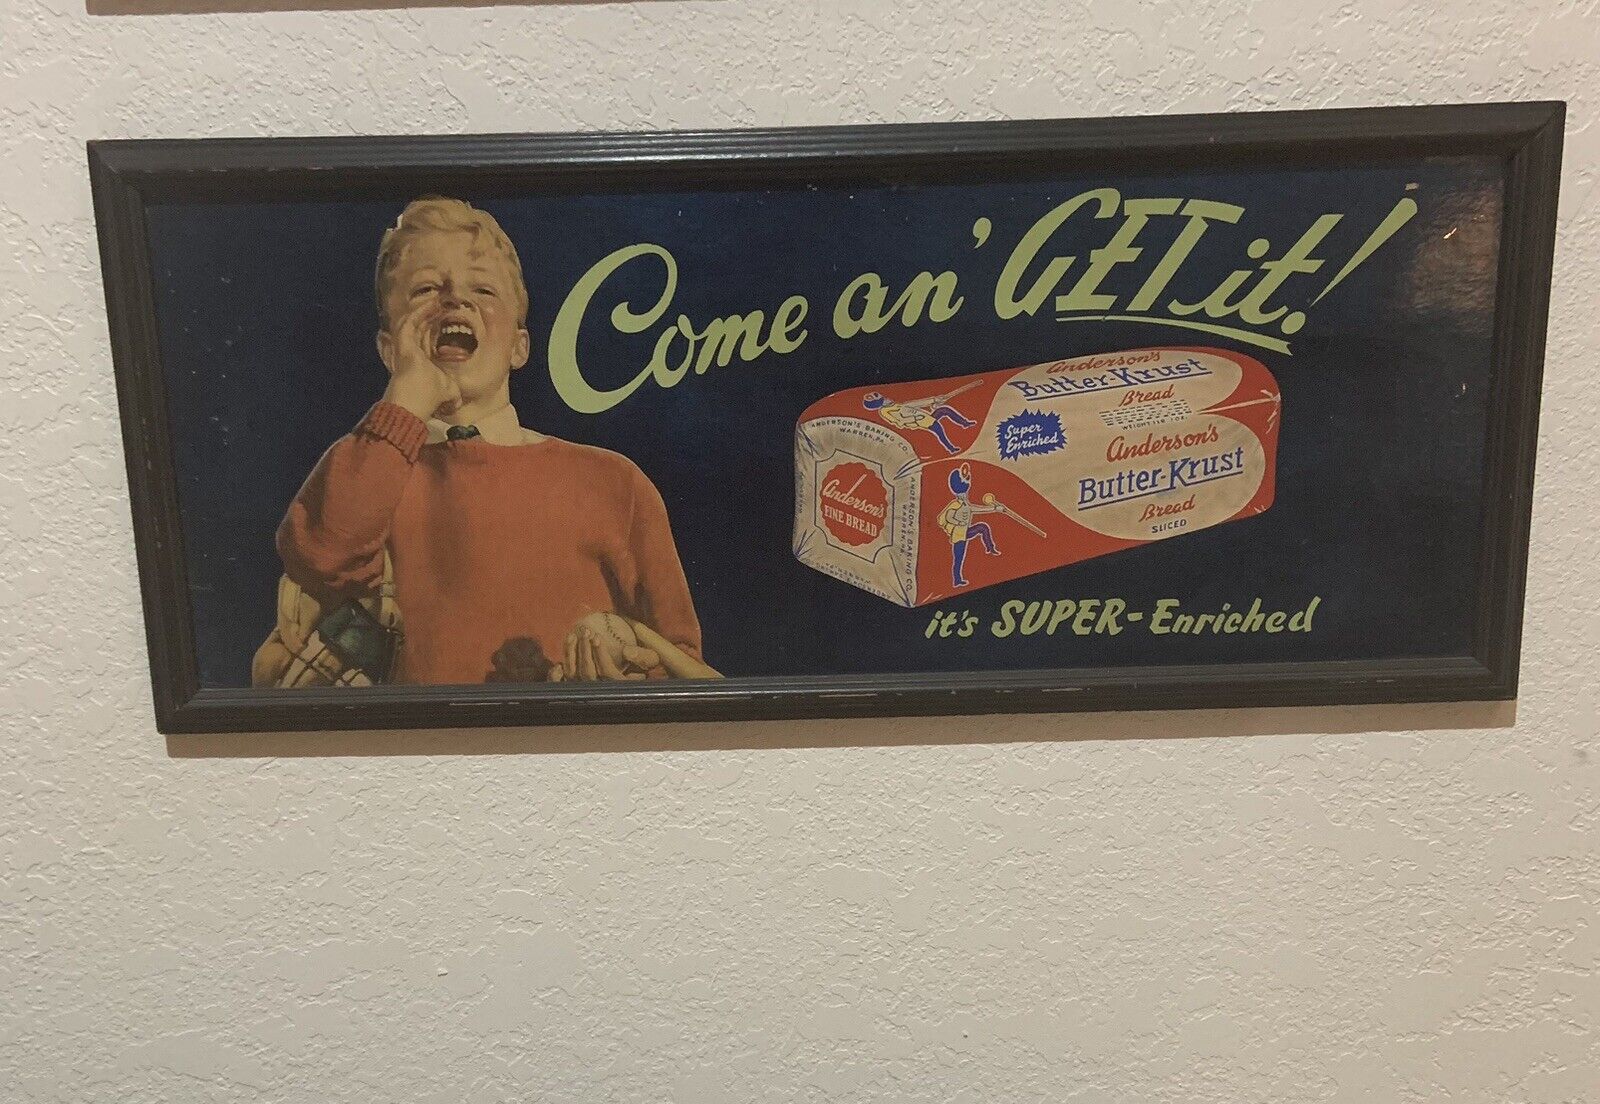 RARE VINTAGE ANDERSON’S BUTTER KRUST BREAD SIGN BASEBALL THEME “COME AN GET IT”